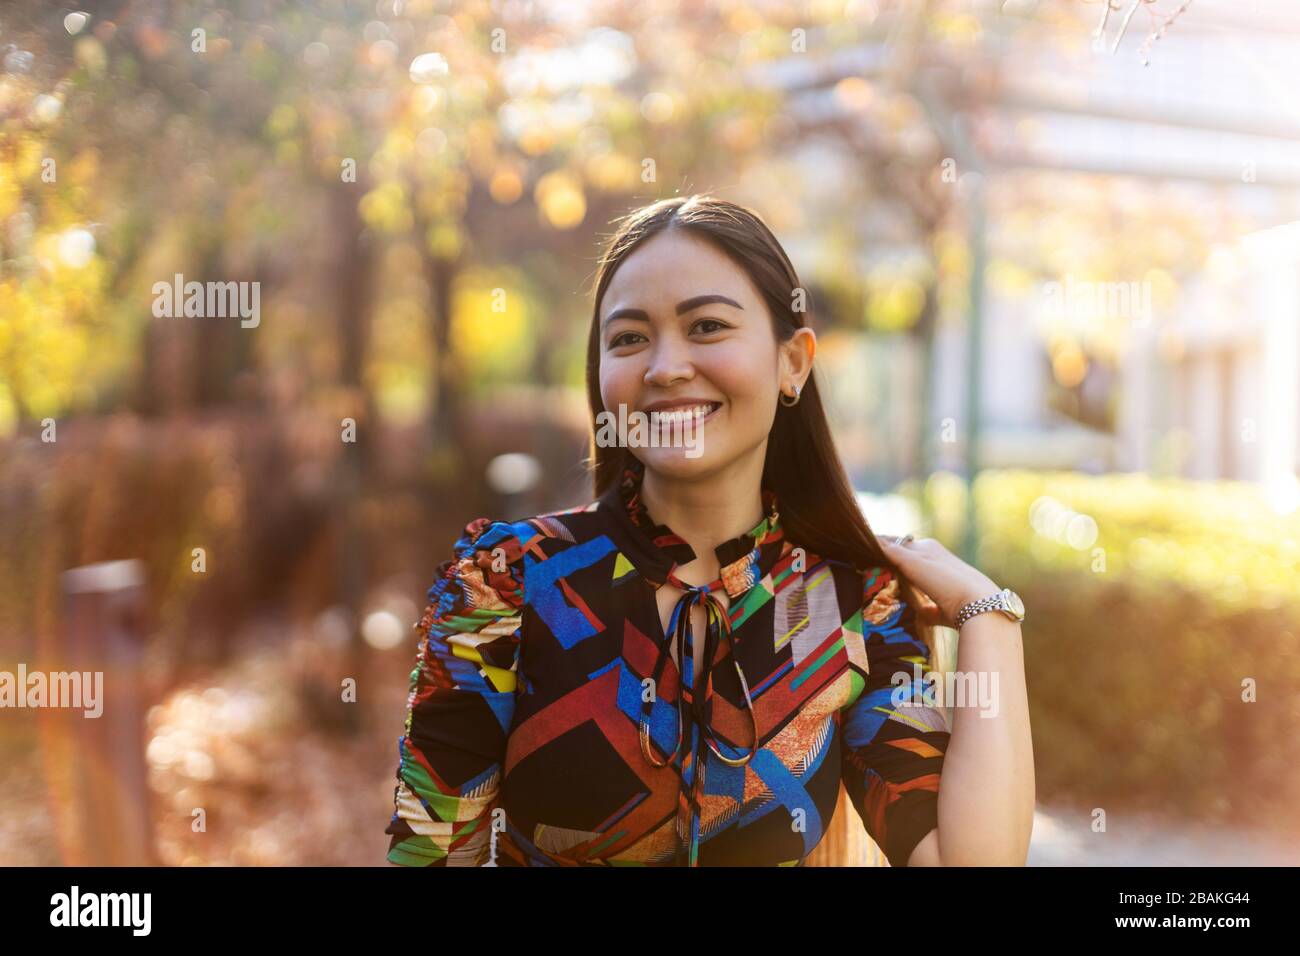 Attractive and happy young woman outdoors Stock Photo